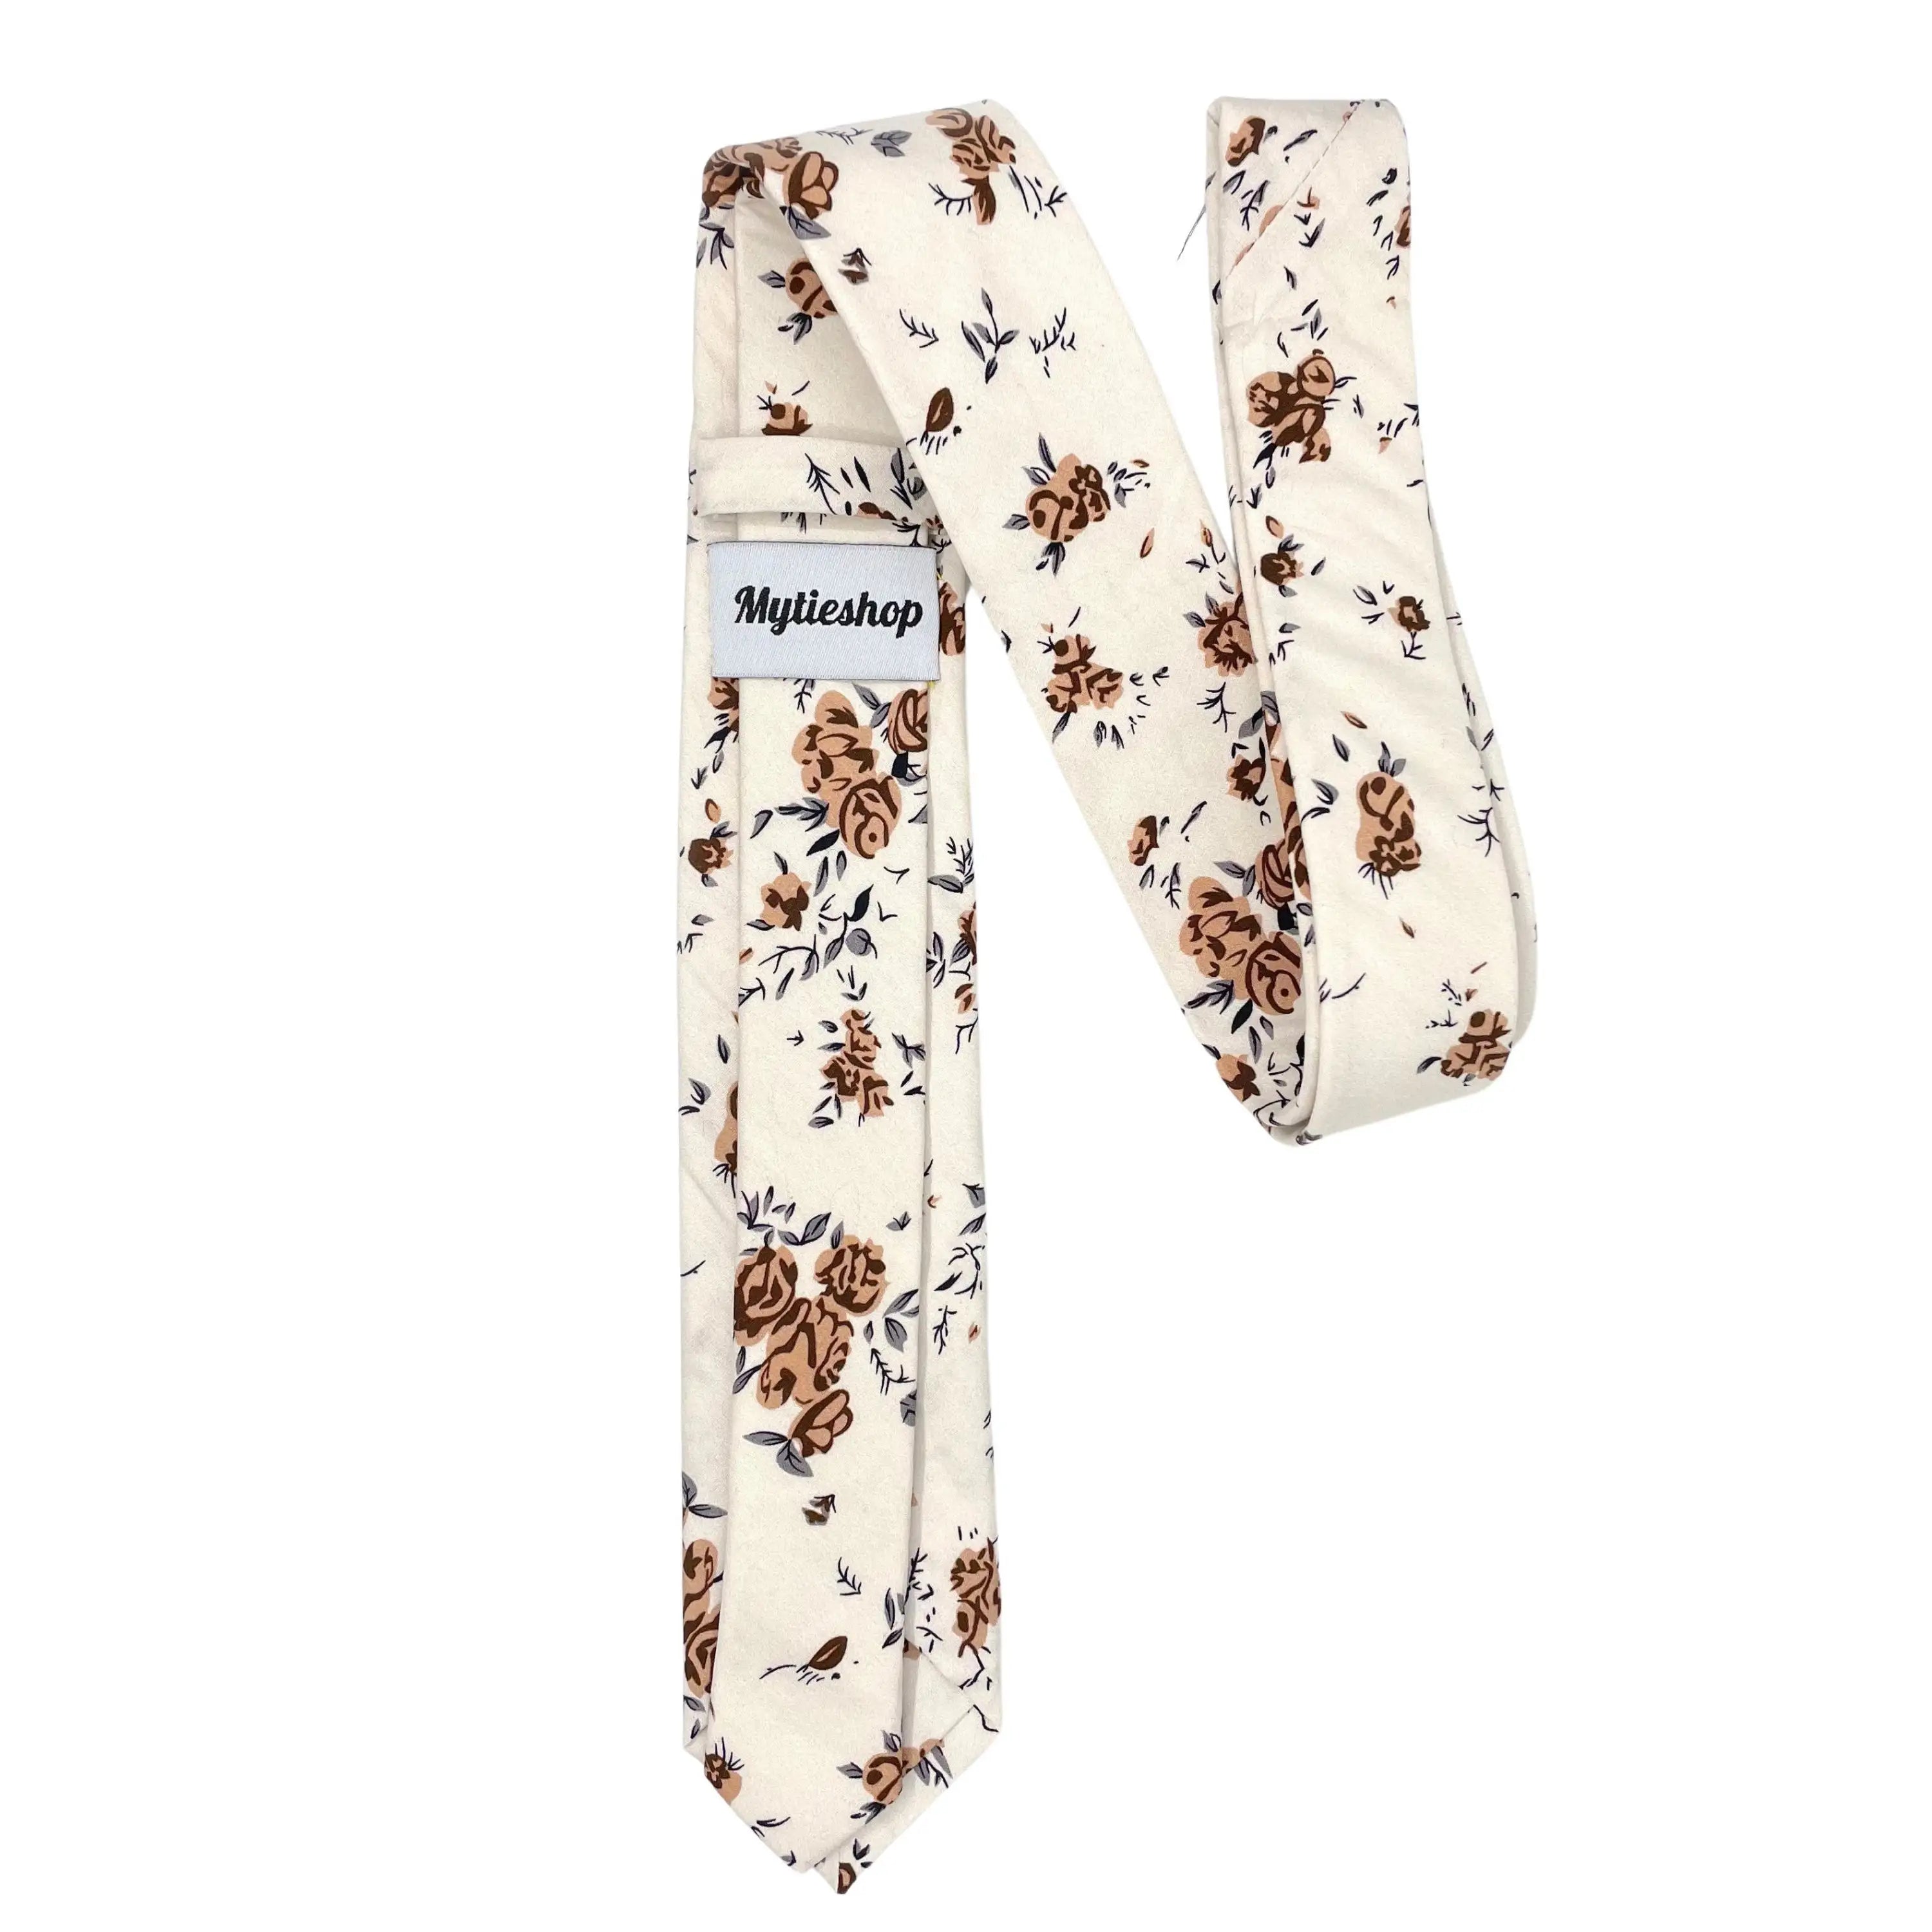 Beige Floral Tie Skinny 2.36” (ERIC) - MYTIESHOP-Neckties-Beige floral tie skinny with brown flowers. Brown floral print neckties for wedding and groom. Anniversary gift ideas for spring weddings. ties in beige-Mytieshop. Skinny ties for weddings anniversaries. Father of bride. Groomsmen. Cool skinny neckties for men. Neckwear for prom, missions and fancy events. Gift ideas for men. Anniversaries ideas. Wedding aesthetics. Flower ties. Dry flower ties.